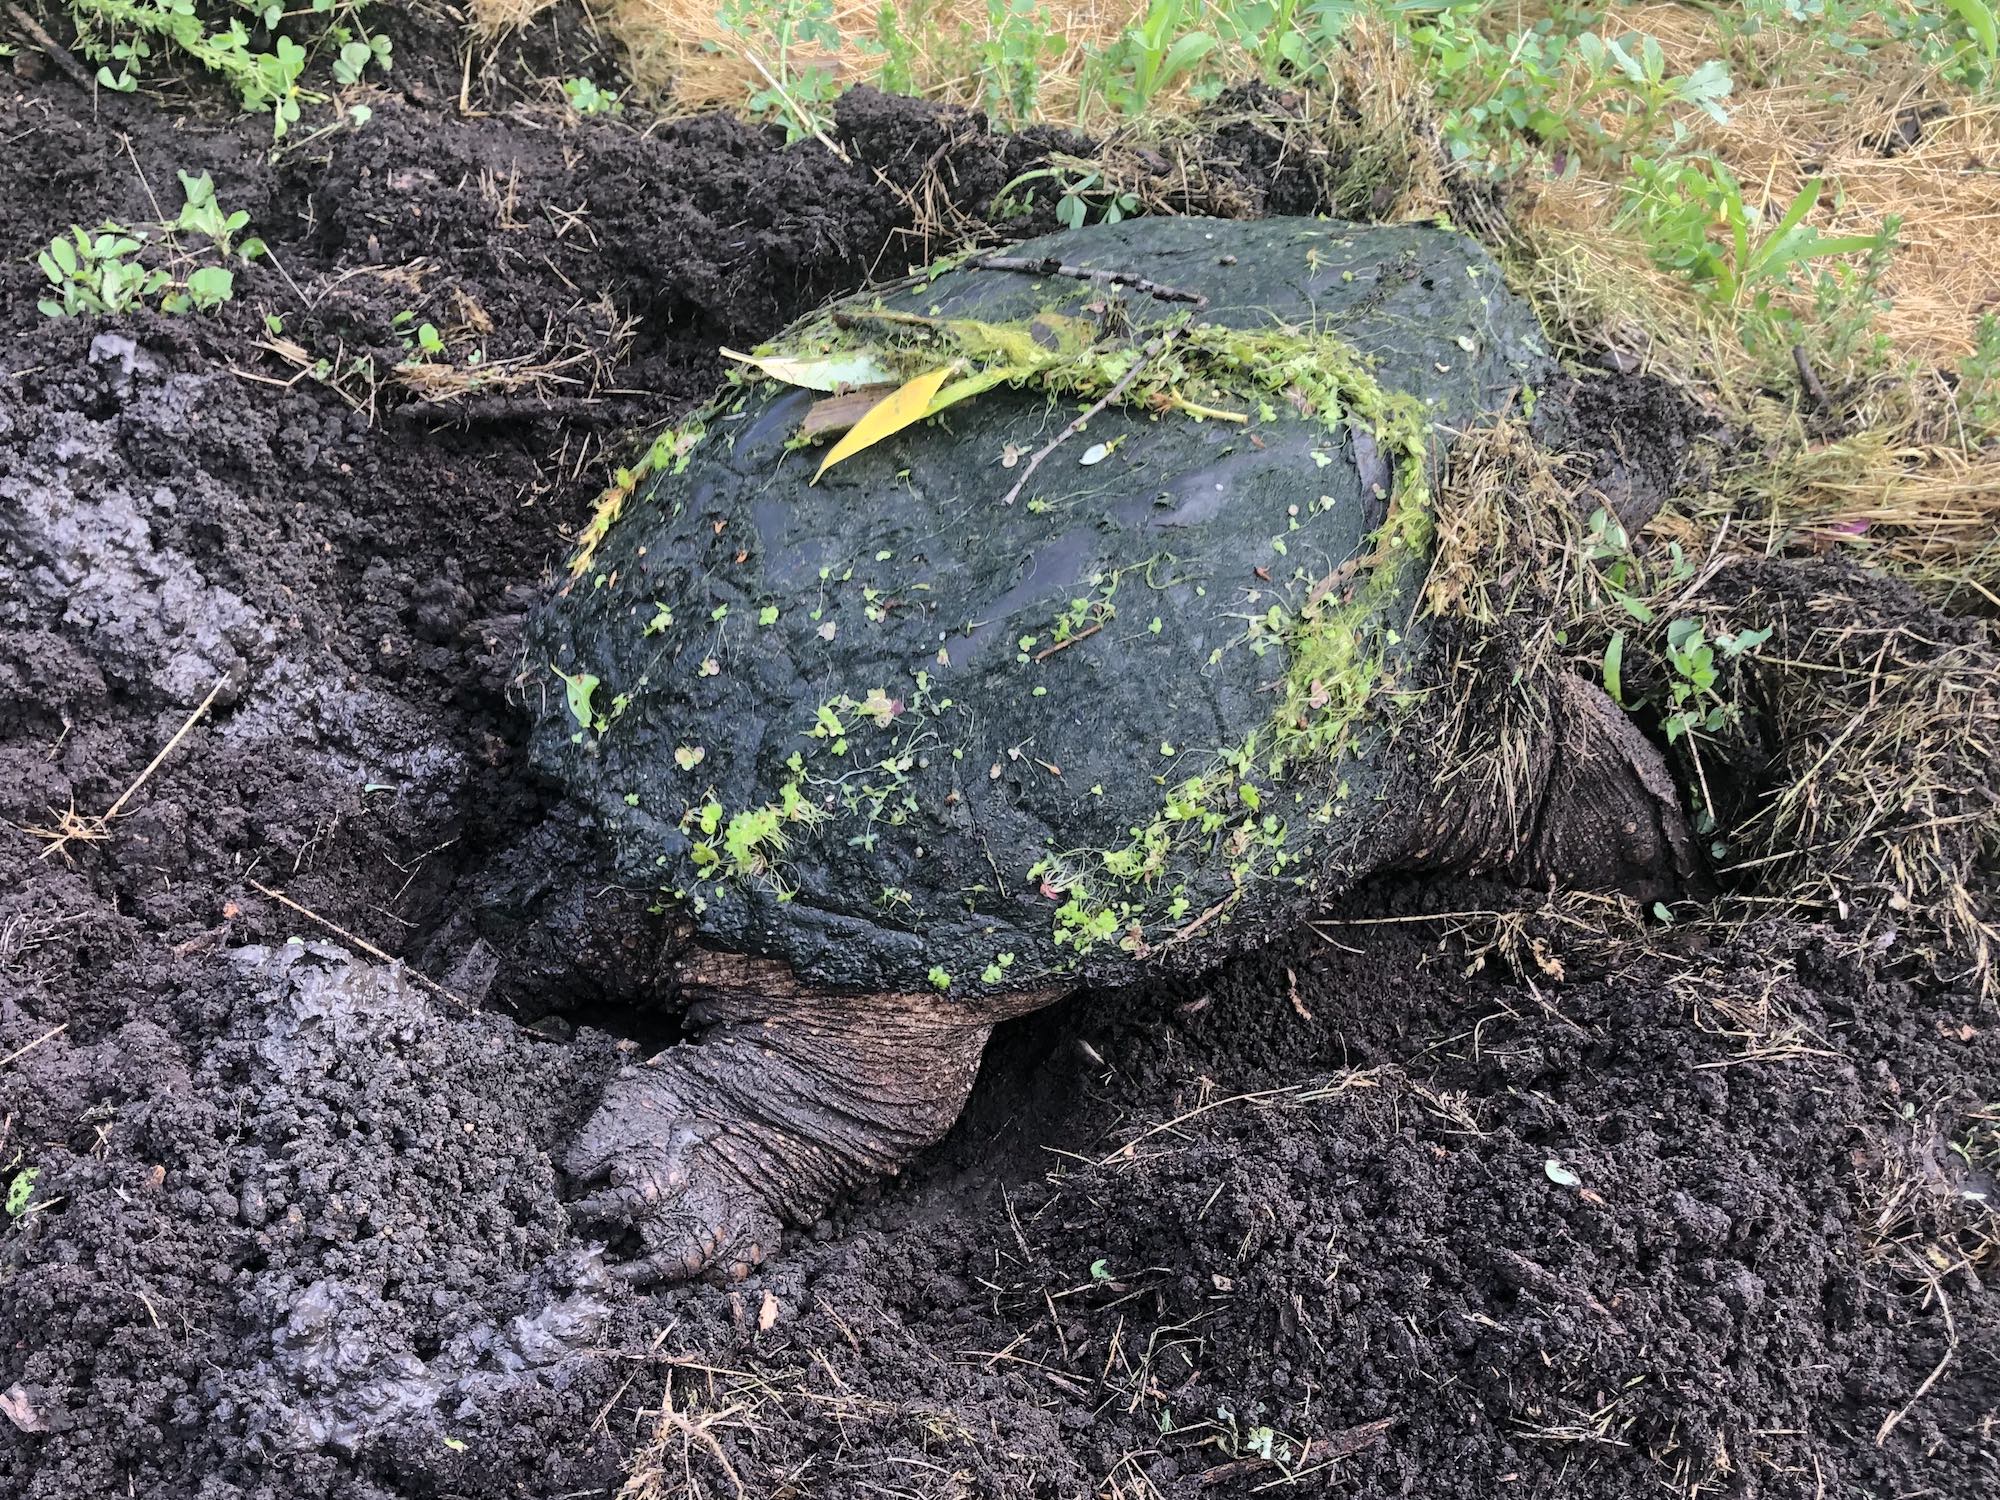 Snapping Turtle laying eggs in E. Ray Stevens Pond and Aquatic Gardens on corner of Manitou Way and Nakoma Road in Madison, Wisconsin on June 10, 2020.